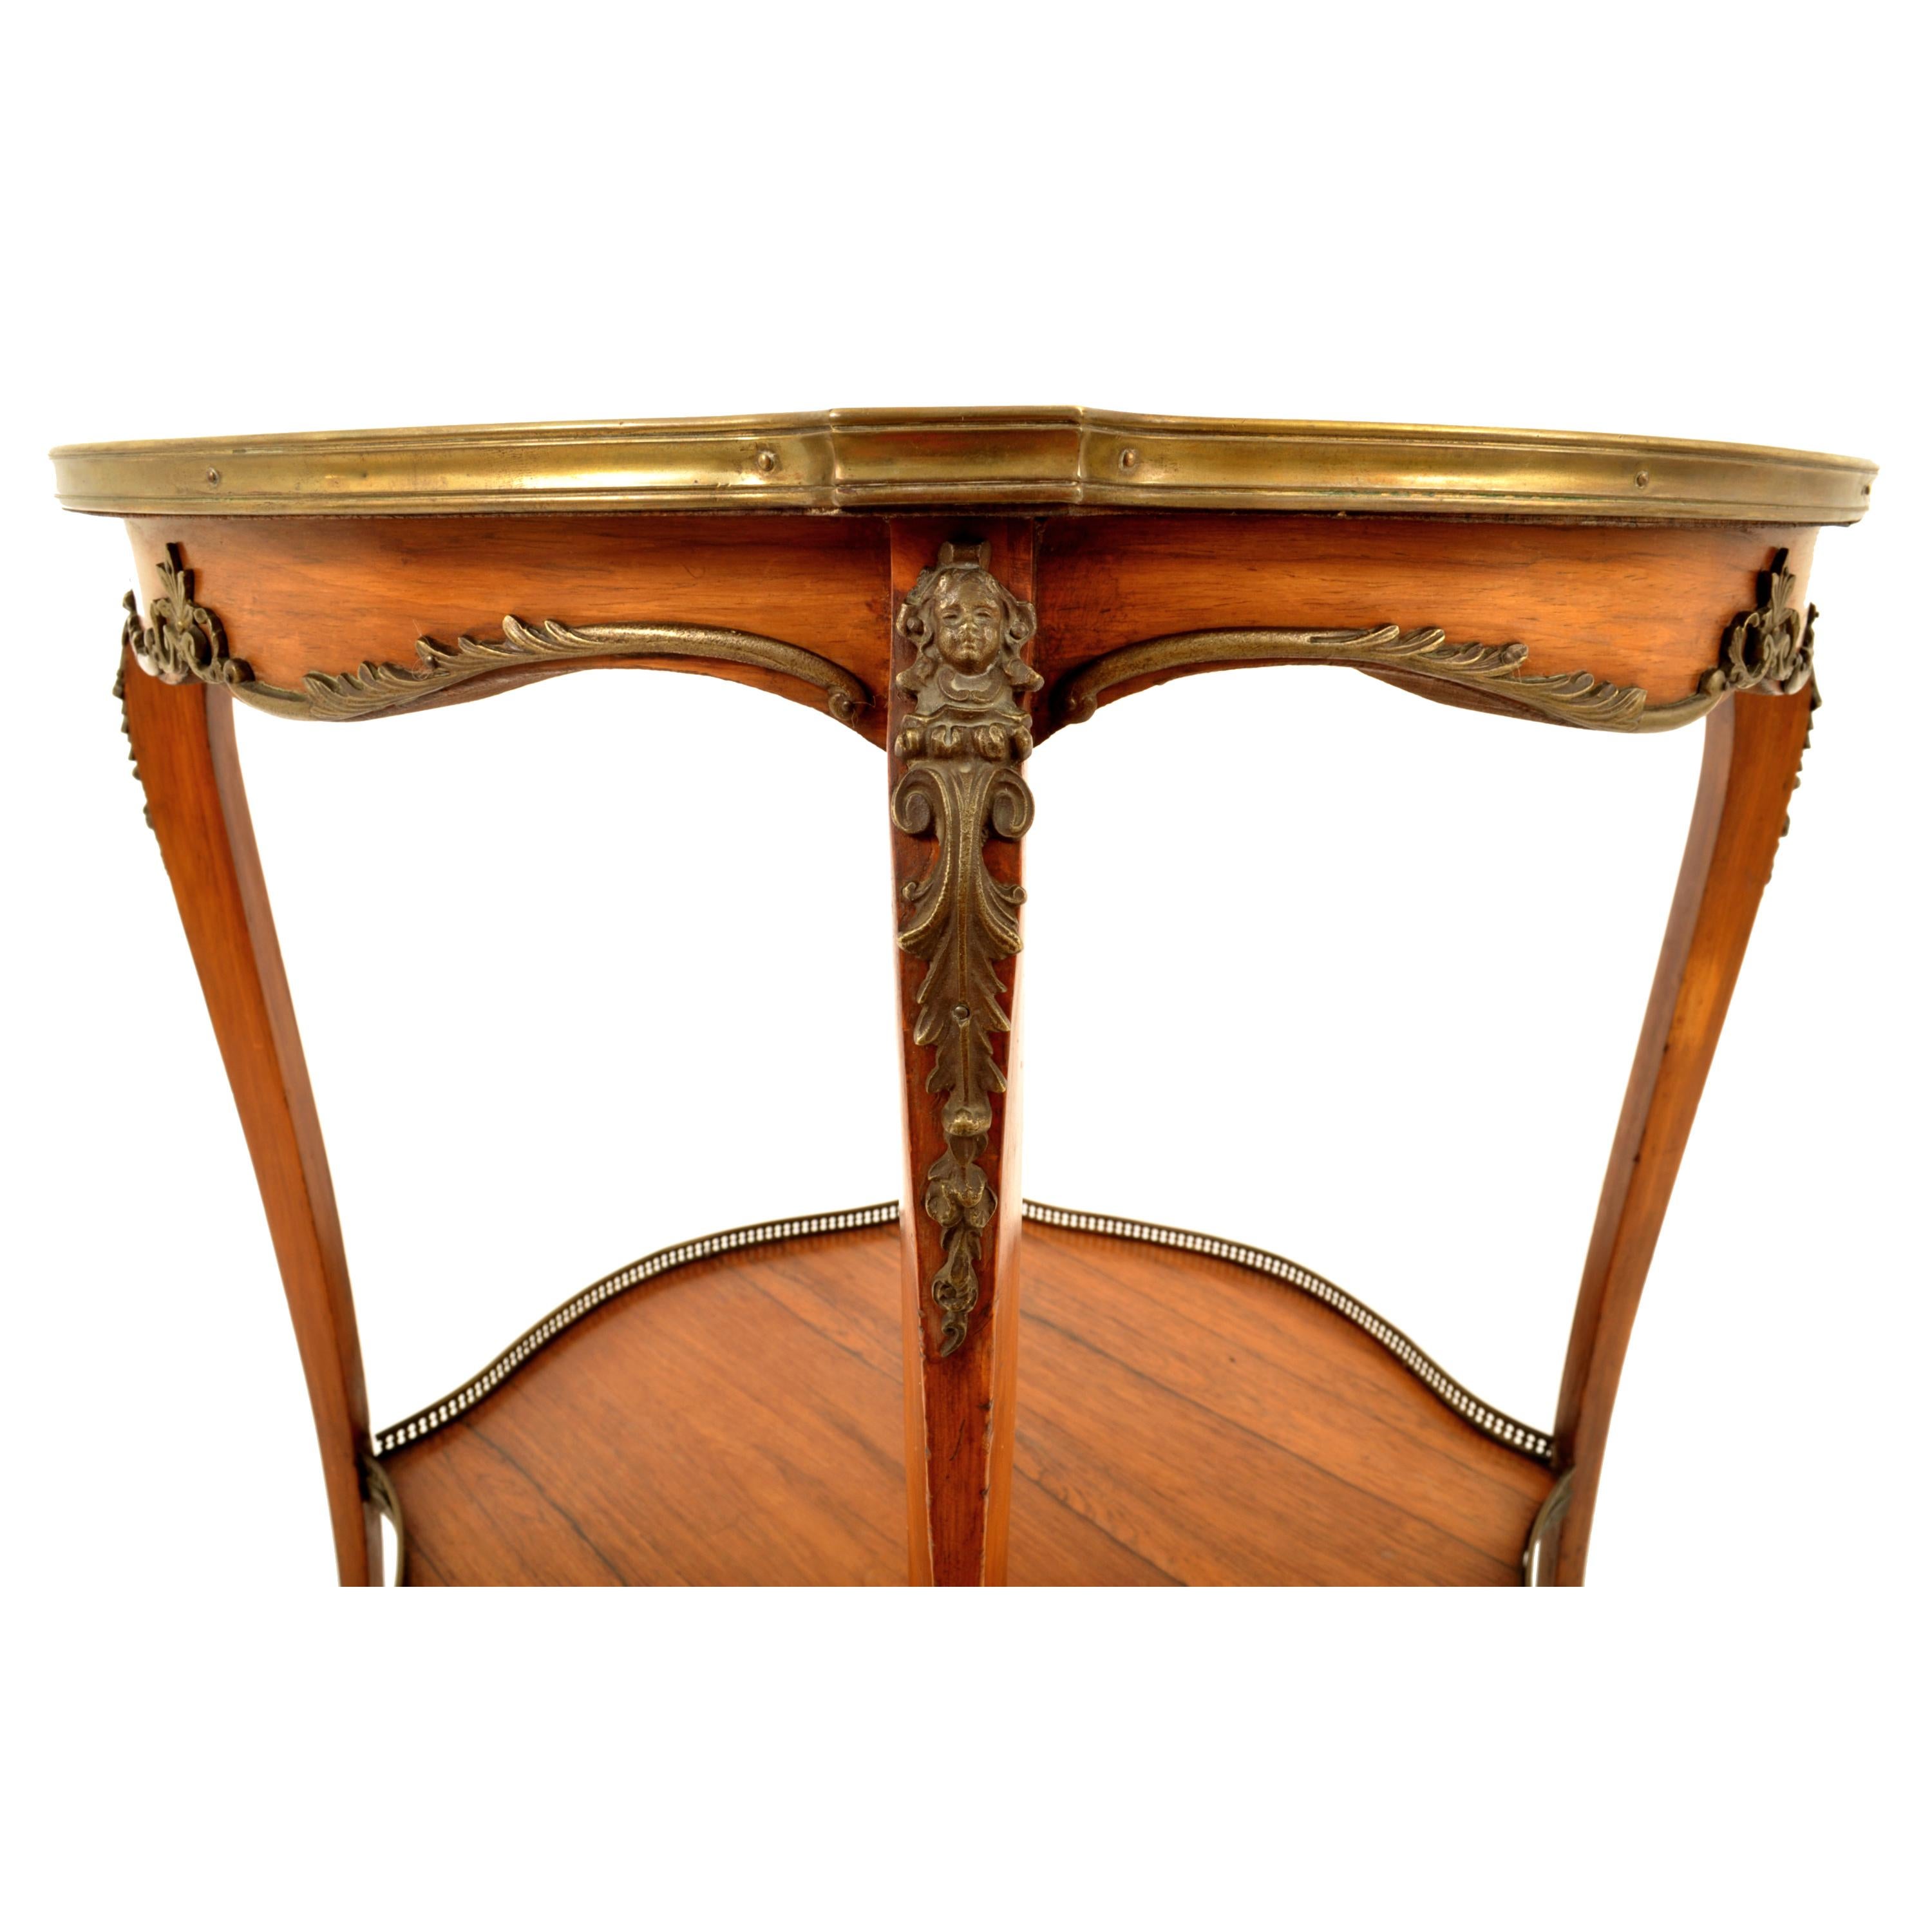 Antique 19th Century French Louis XV Marquetry & Ormolu Side Center Table 1880 1